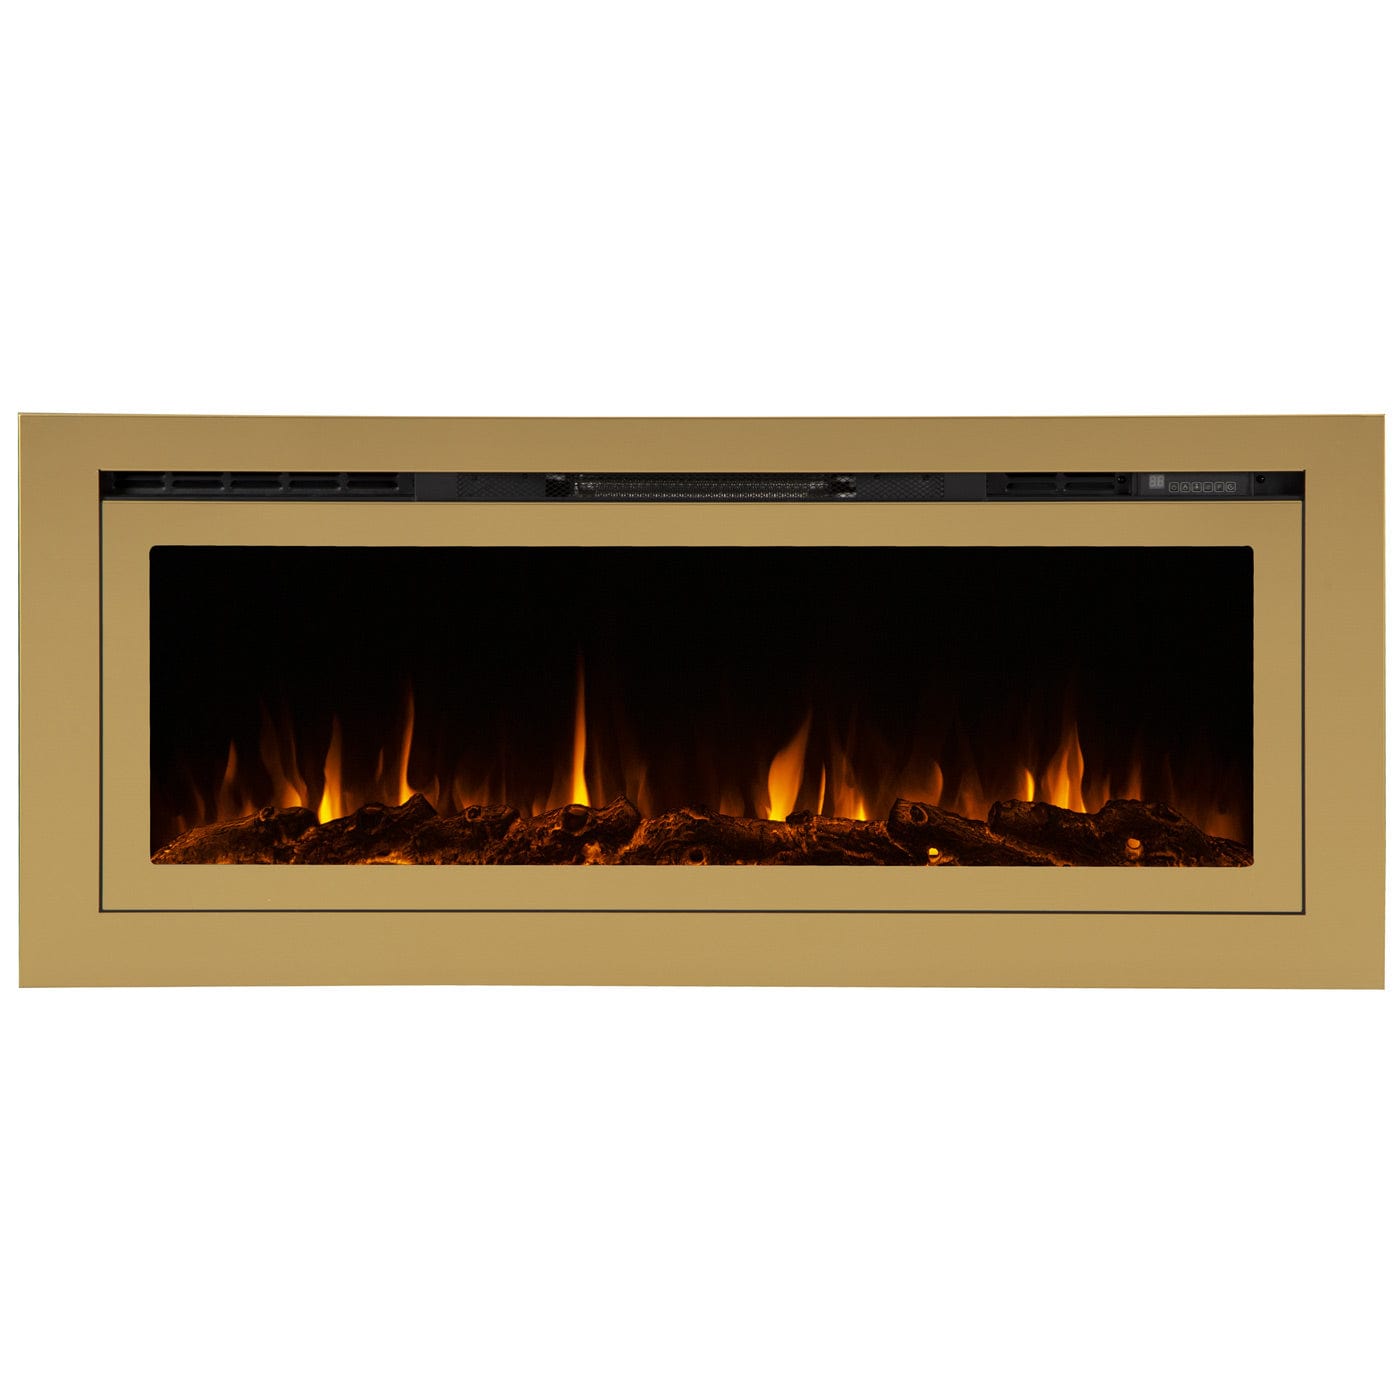 Touchstone The Sideline Deluxe Gold 50" 86275 Recessed Smart Electric Fireplace - TS-86275 - Avanquil